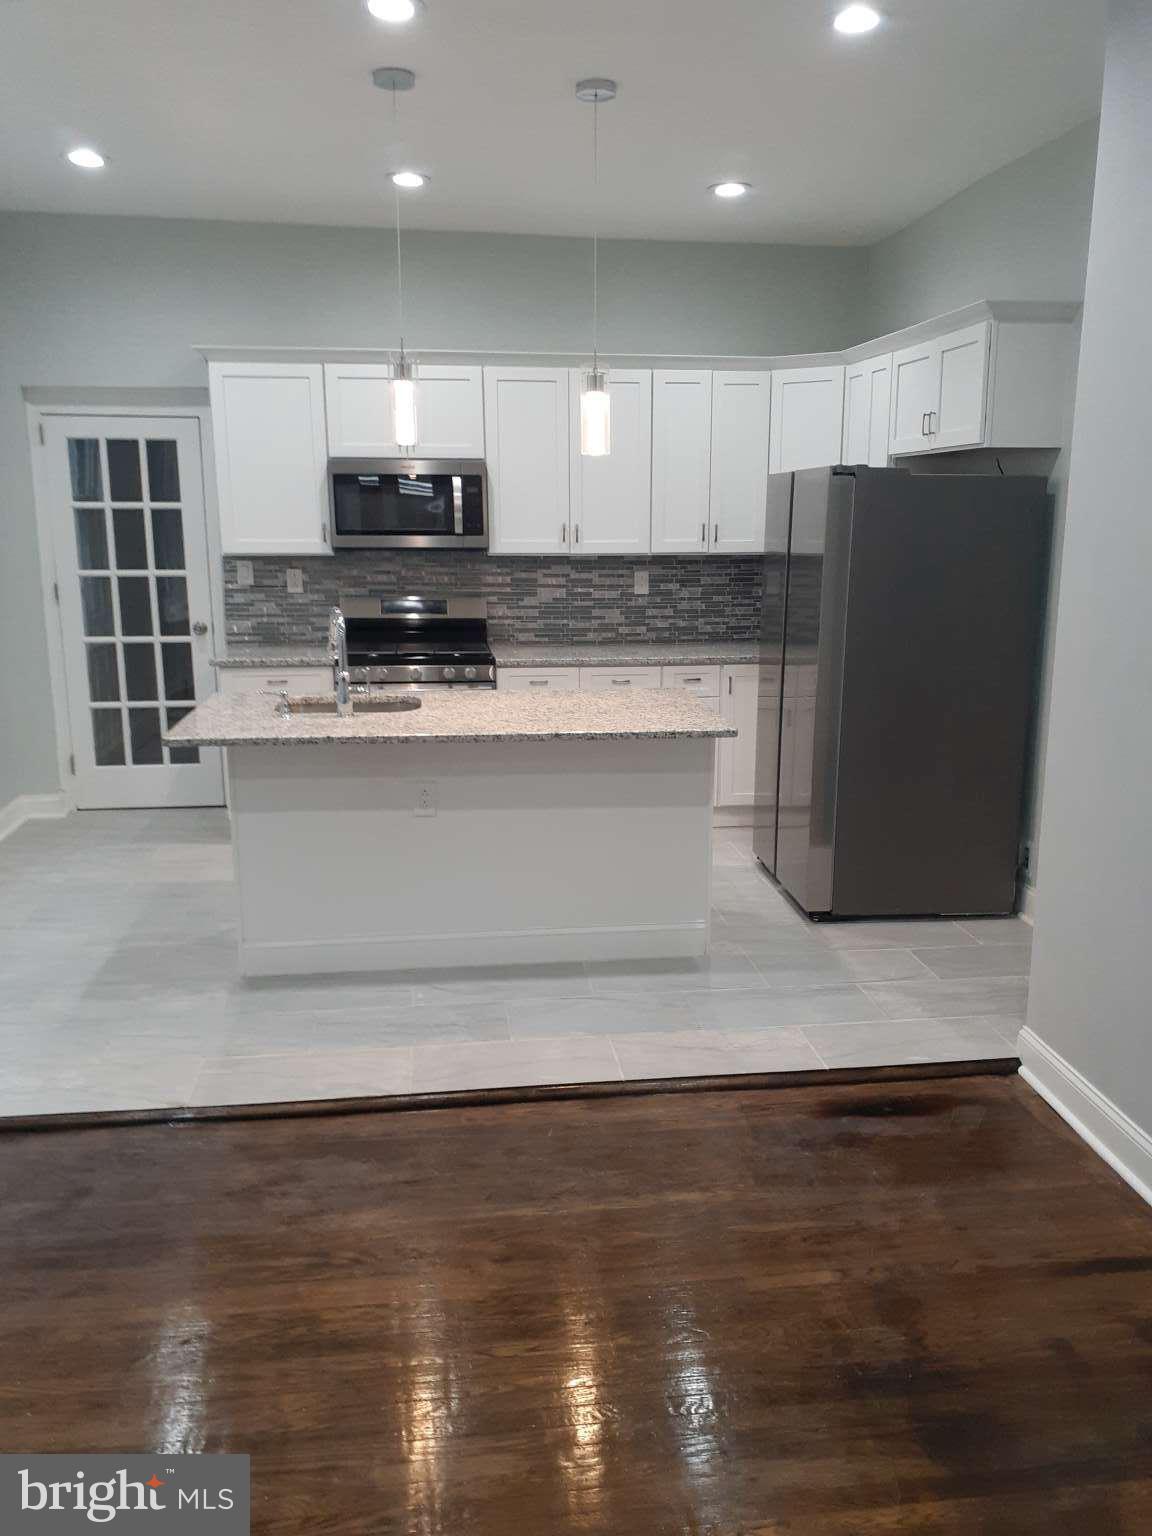 a view of kitchen with granite countertop stainless steel appliances counter space and a sink